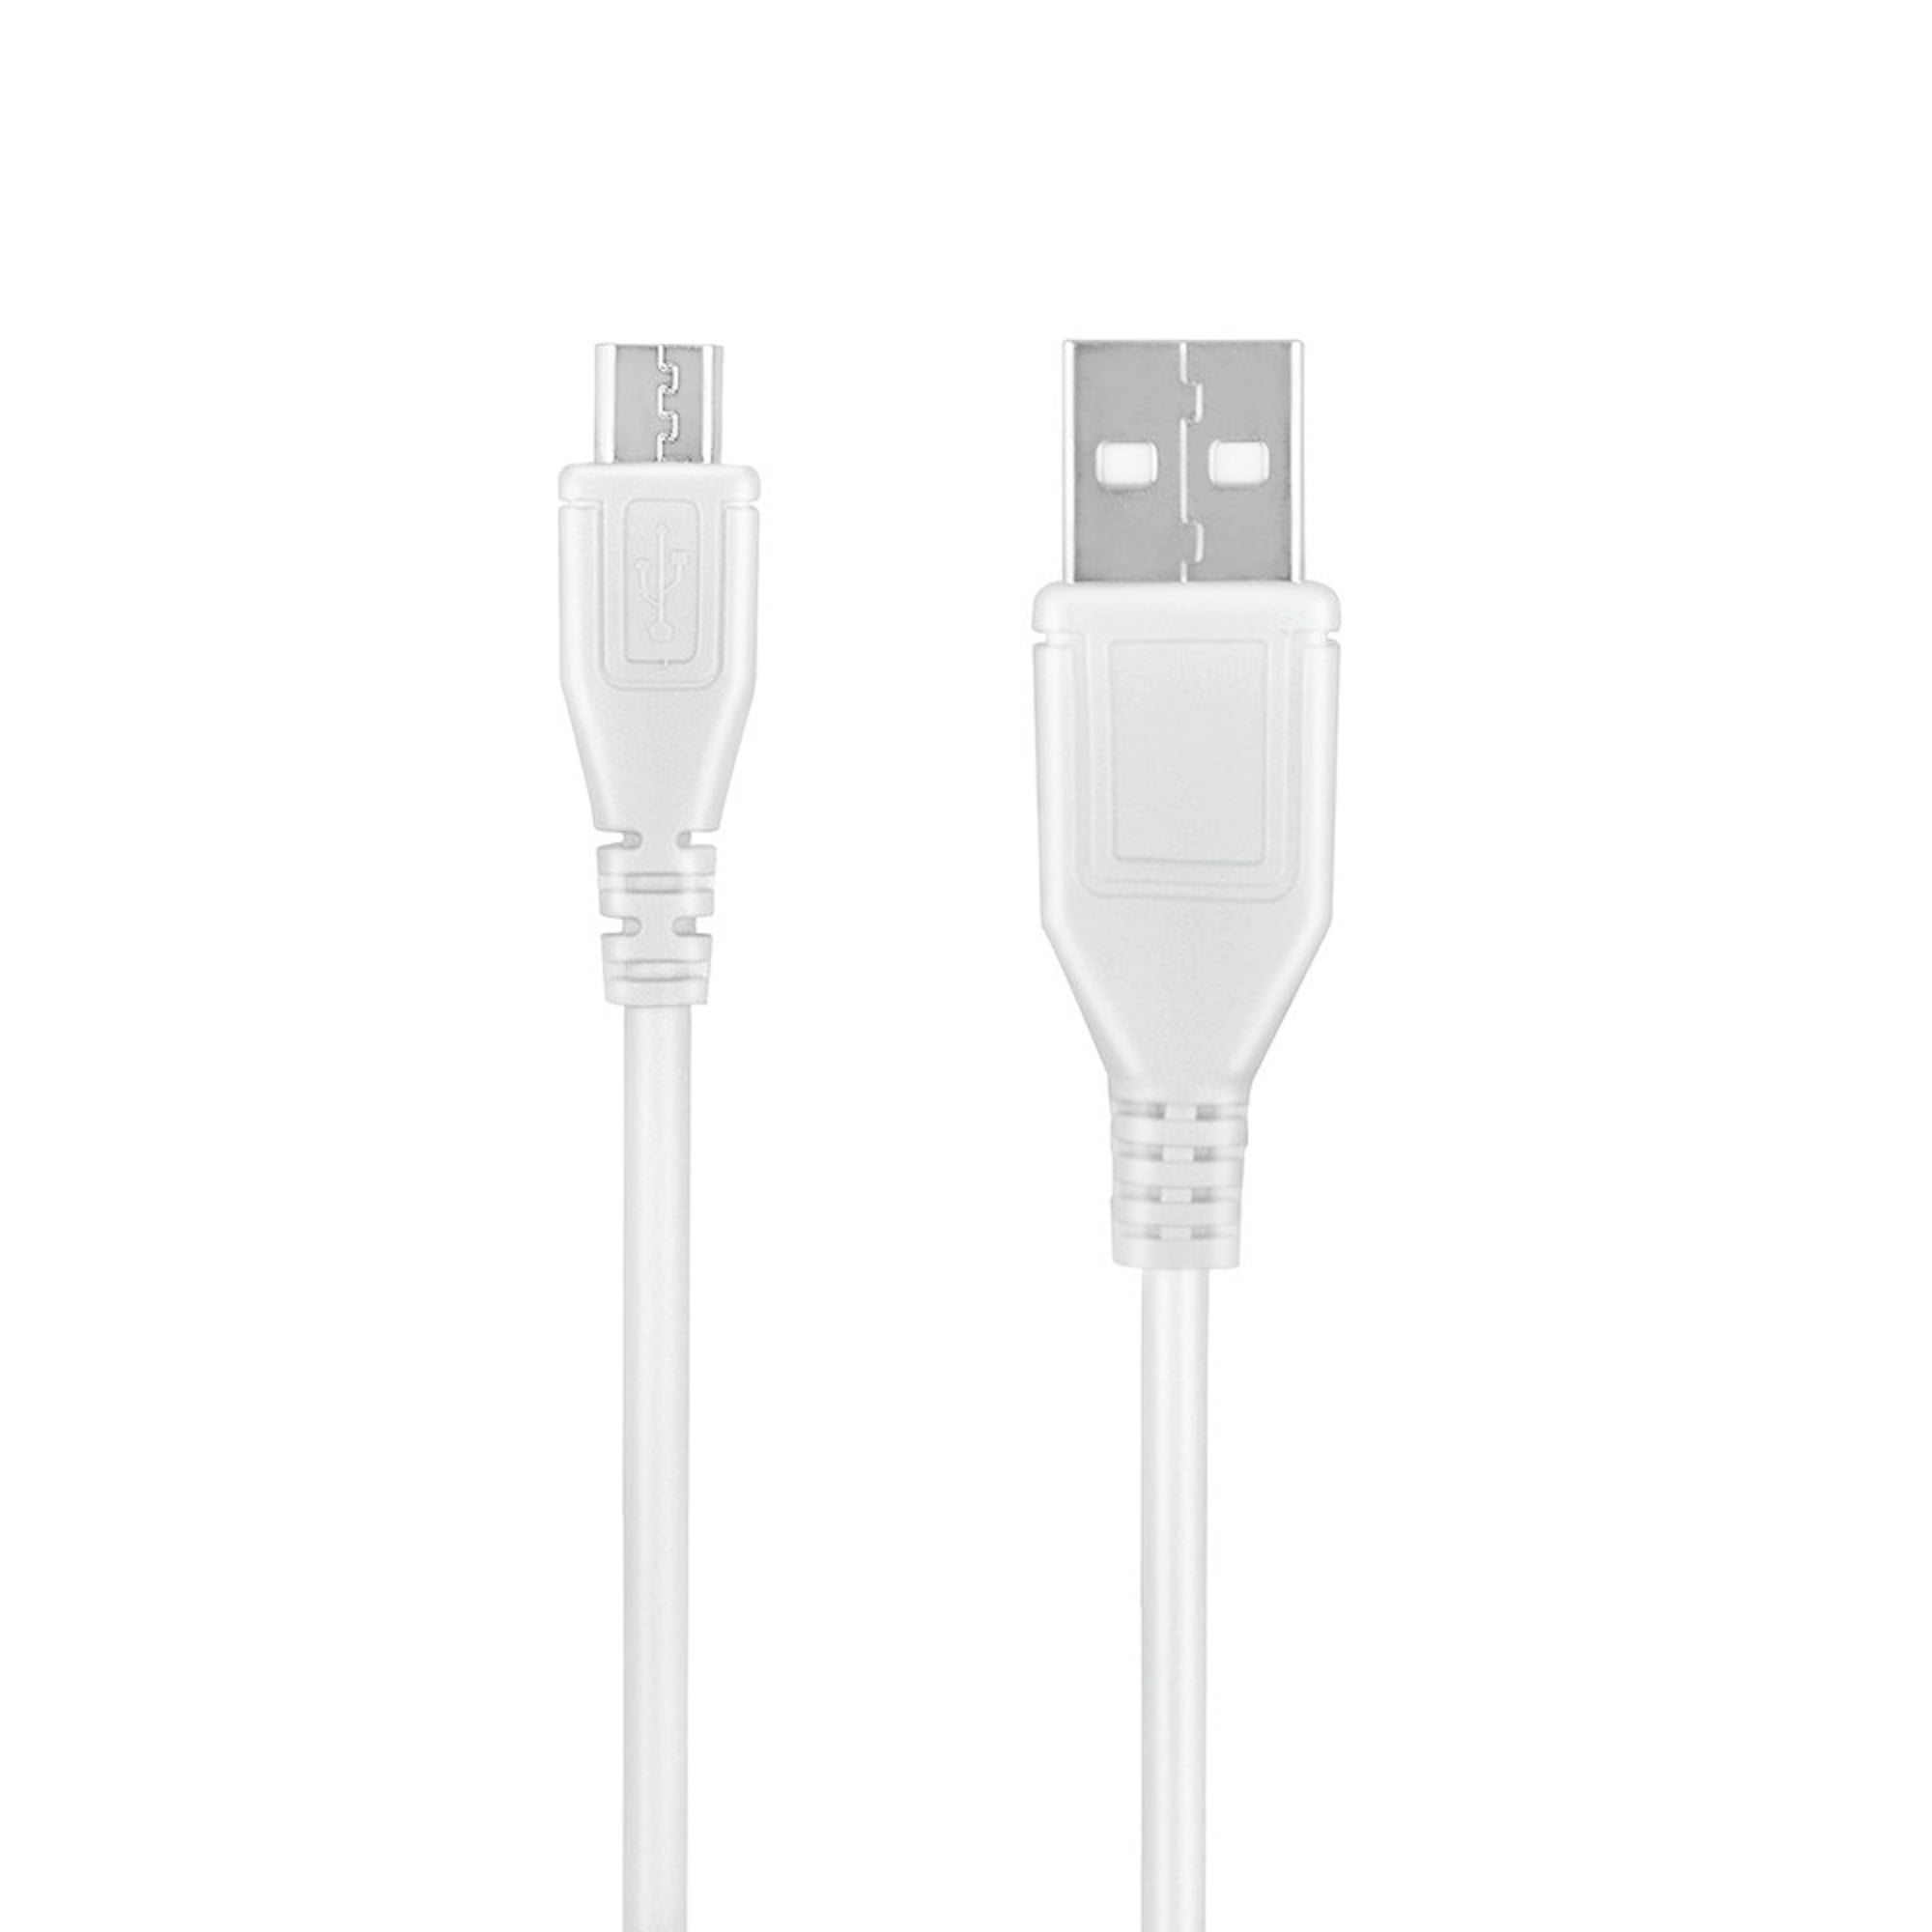 K-MAINS 5ft White Micro USB Charging Cable Cord Lead Replacement for  Pantech Breeze III P2030 Ease P2020 Jest TXT8040 Jest 2 TXT8045 P9050 Crux  